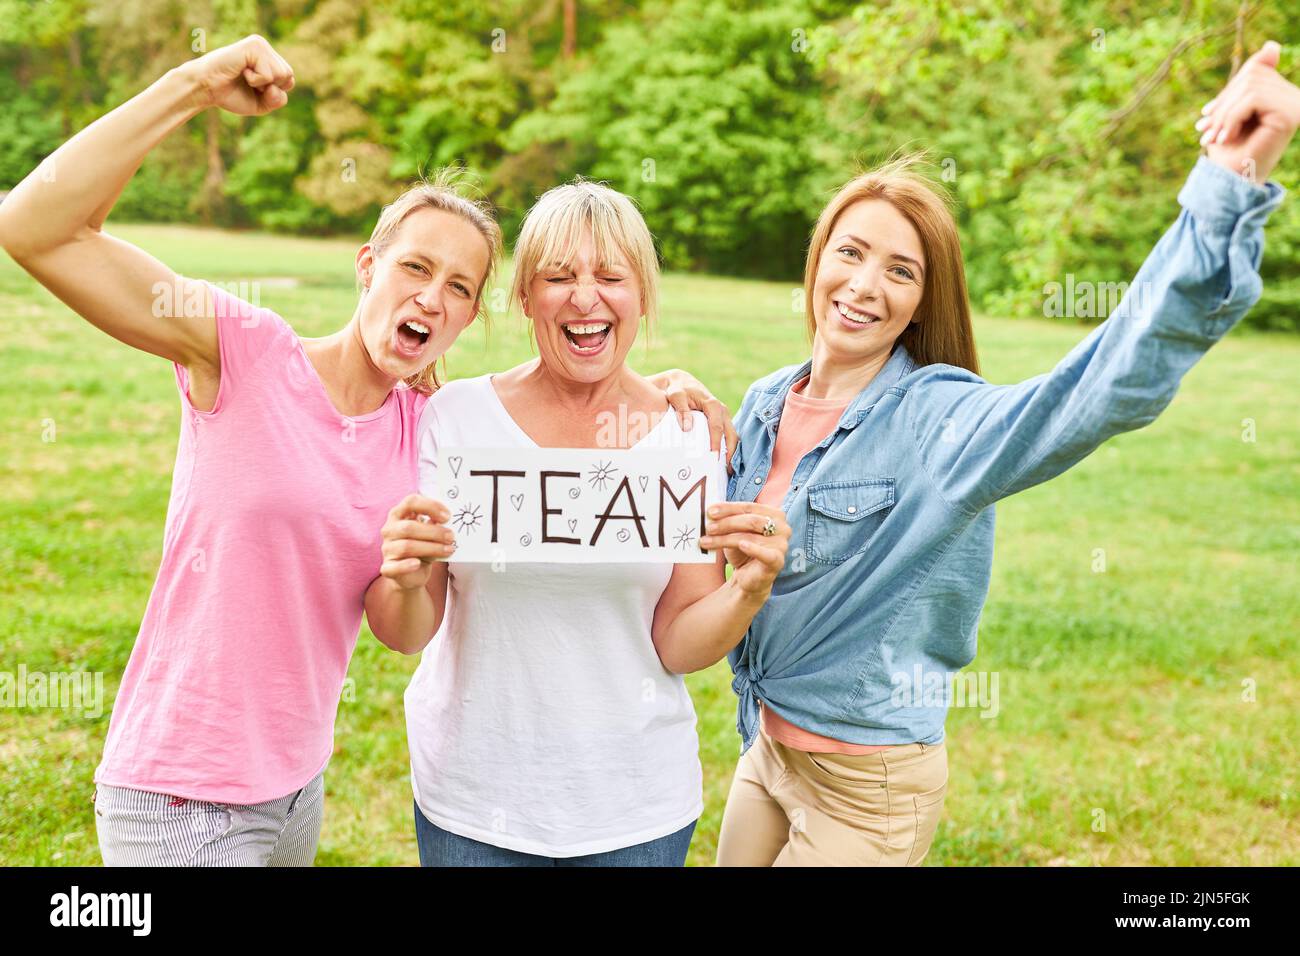 Three women cheering as winners with team sign in hands as concept for girl power Stock Photo